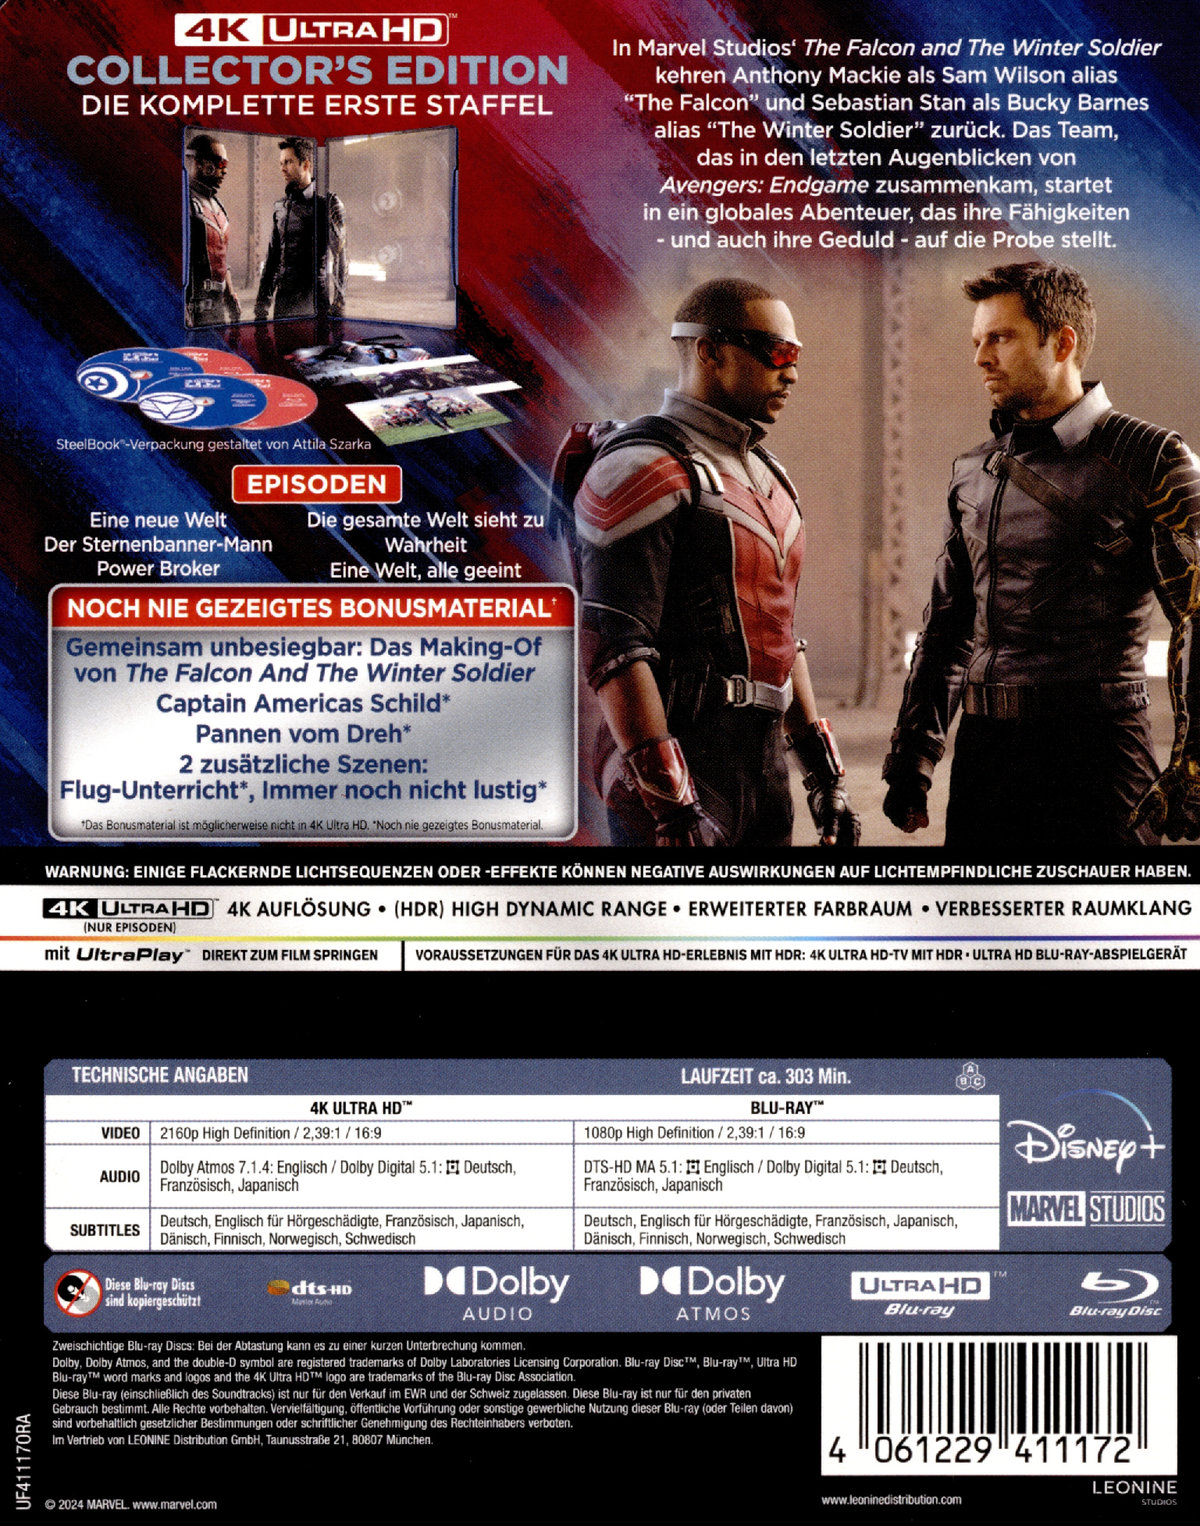 The Falcon and the Winter Soldier - Staffel 1 - Limited Steelbook Edition  (4K Ultra HD)